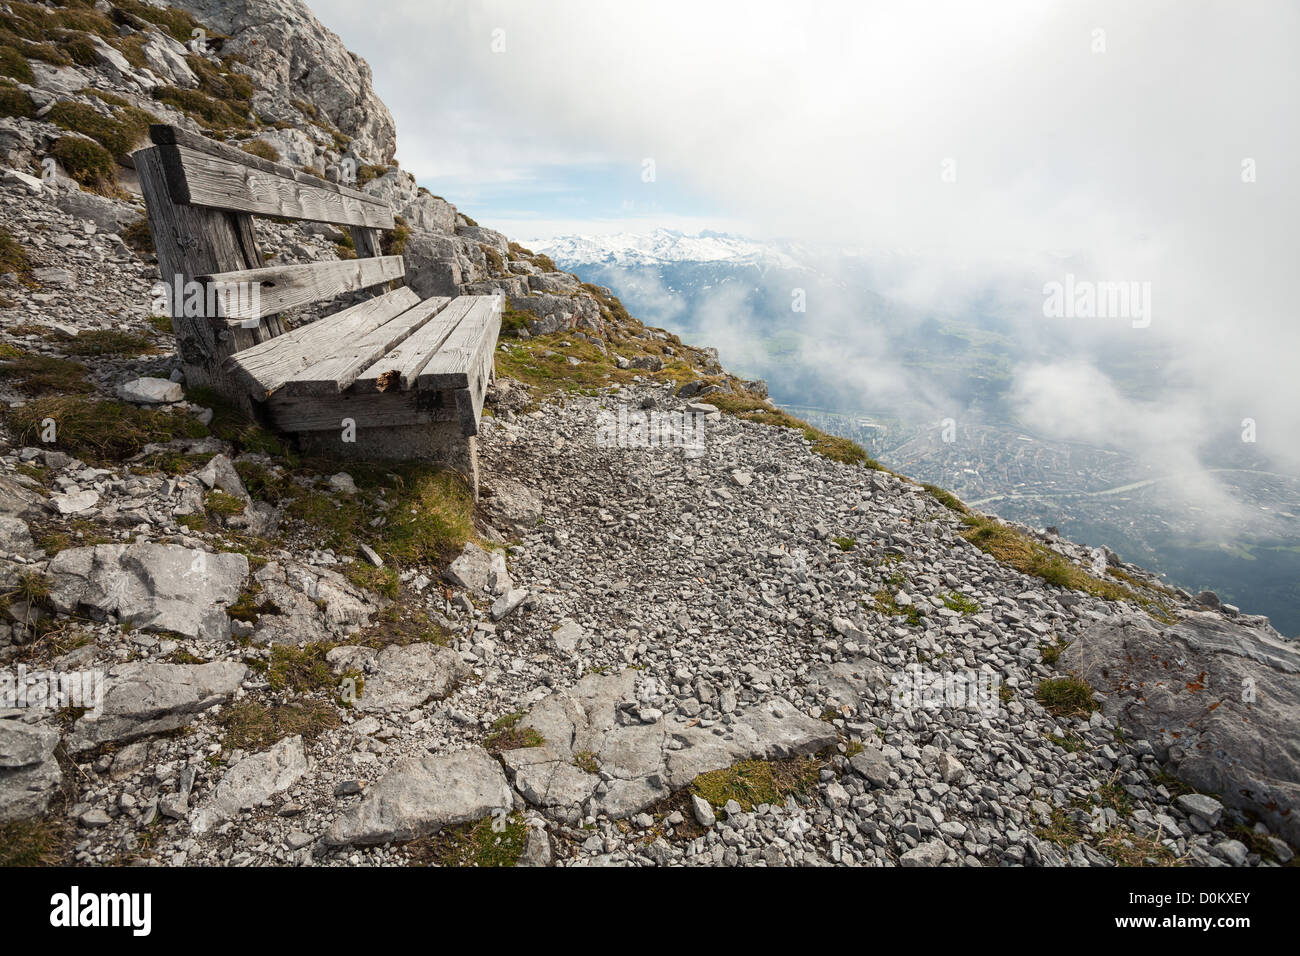 At bench seat on the edge of a rocky mountain overlooking Innsbruck which is beneath the clouds in the valley below. Stock Photo